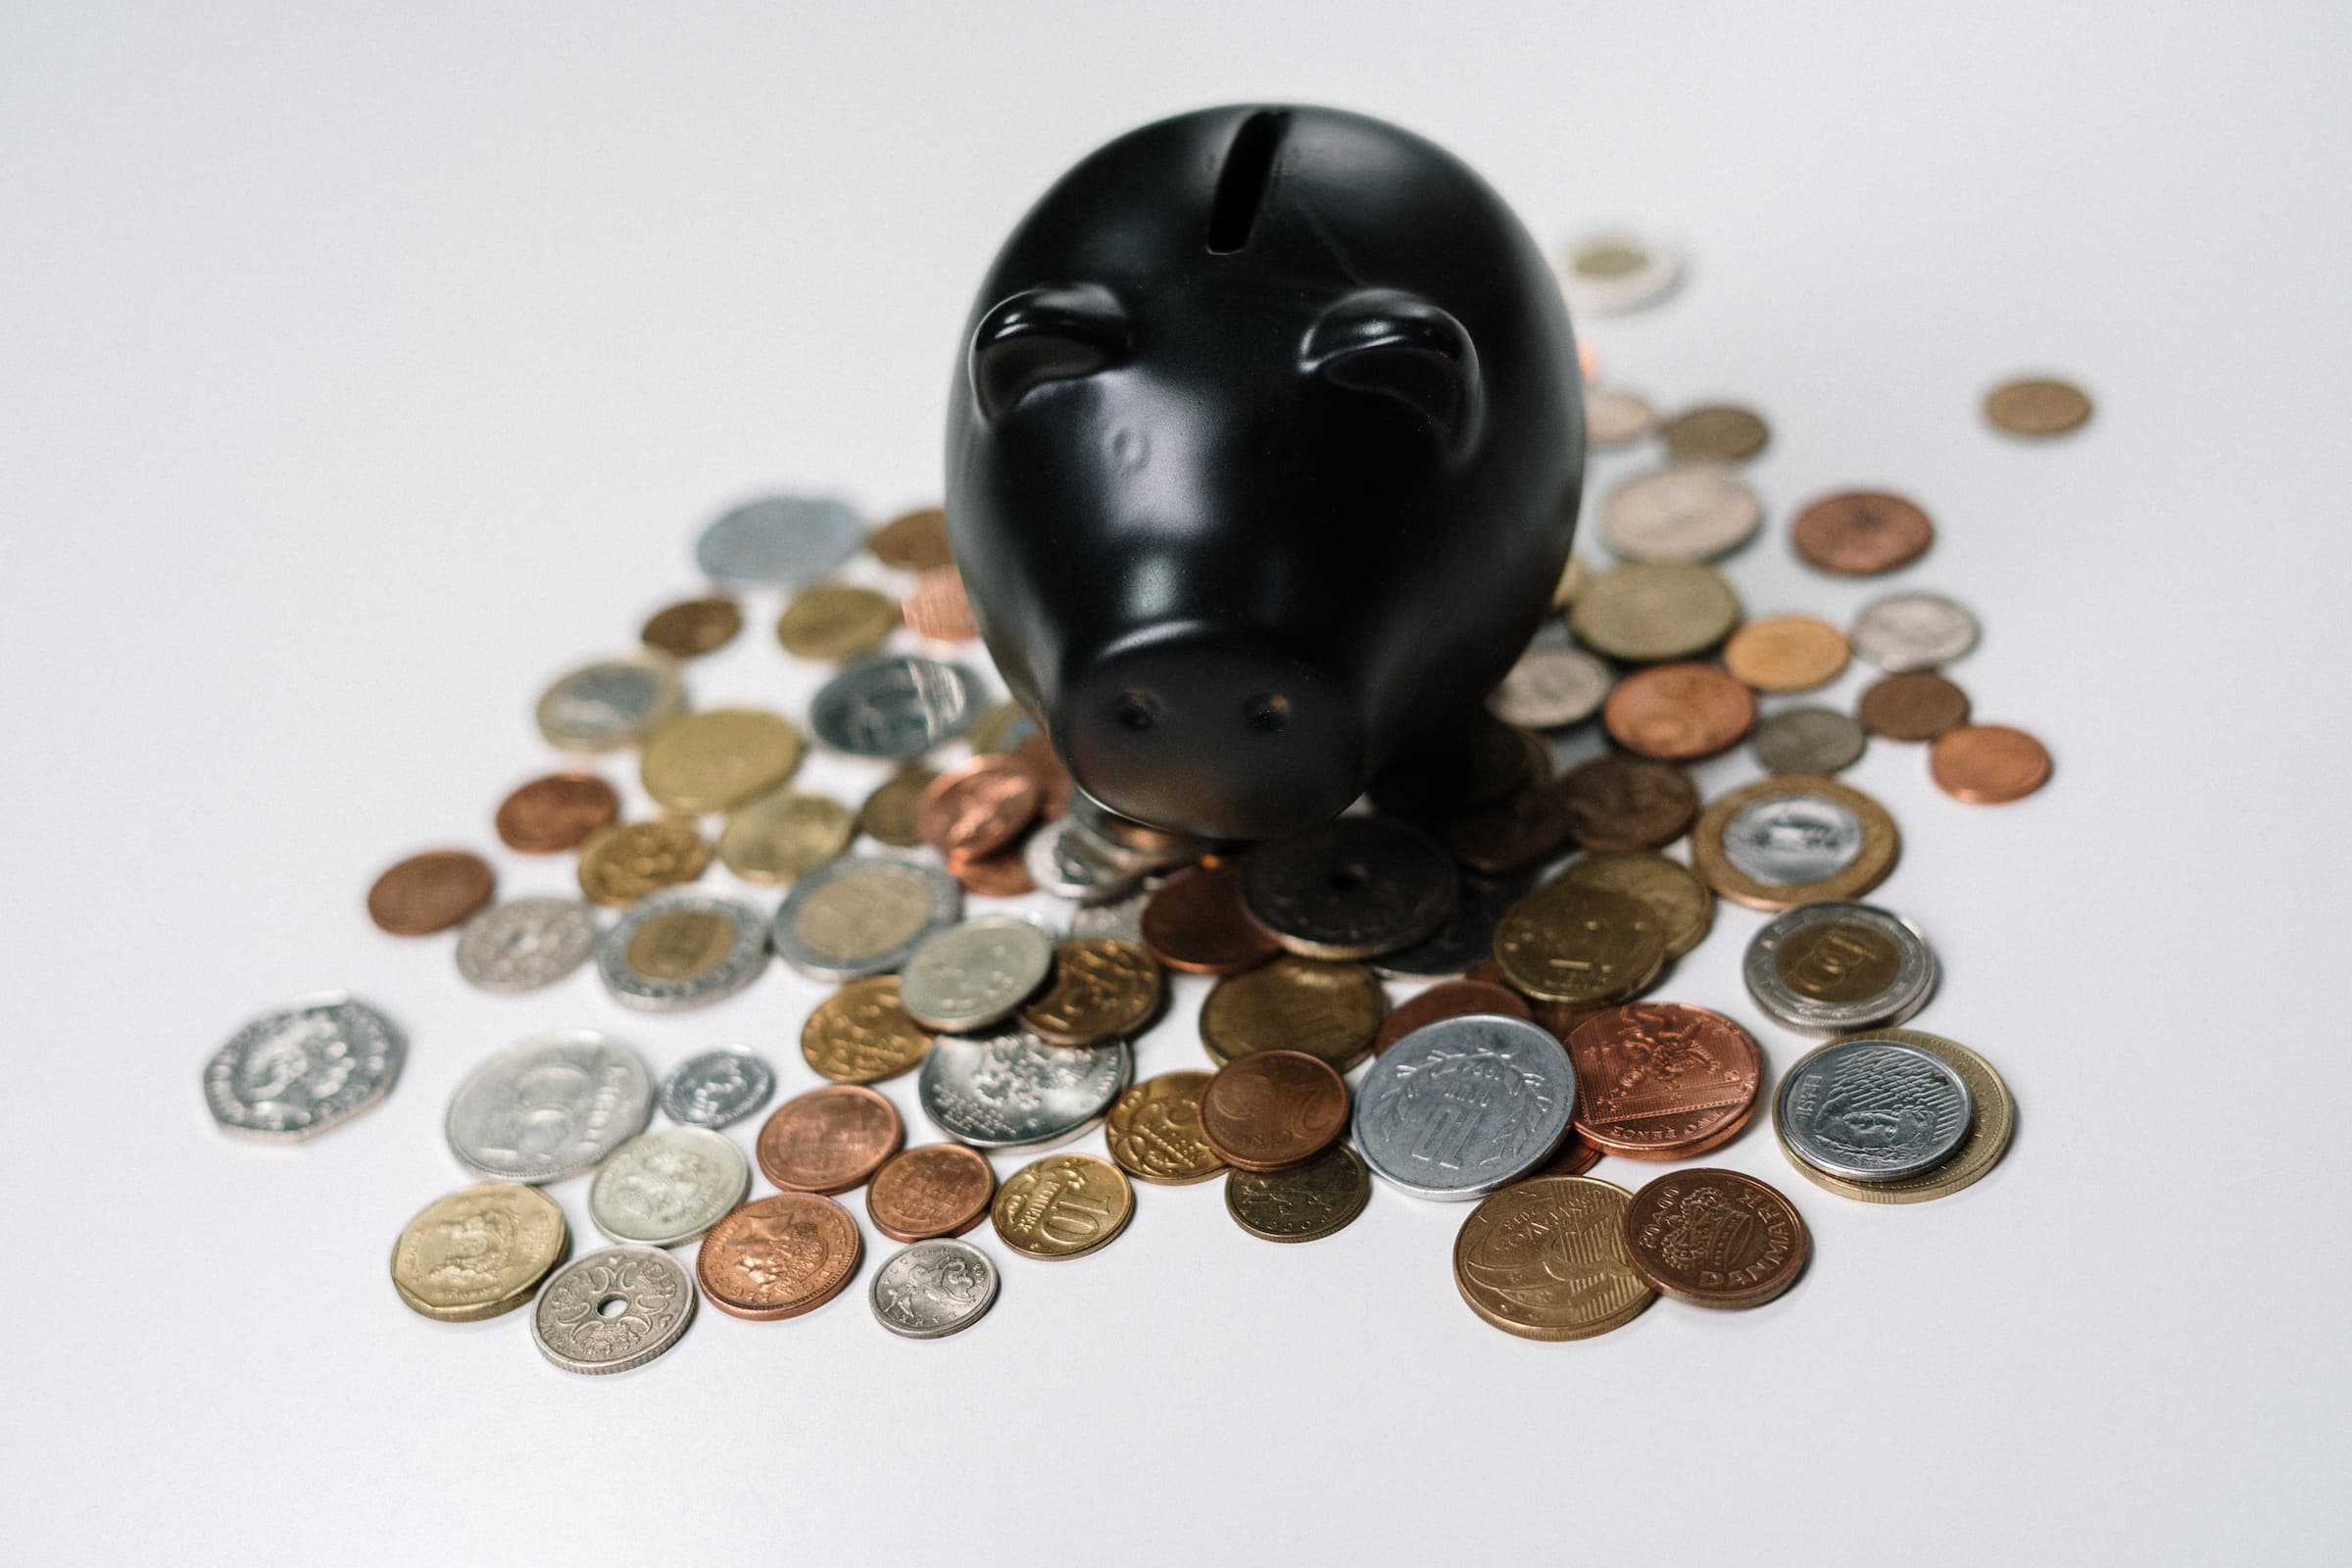 black pig black piggy bank with coins money dollars quarters dimes nickels pennies on a white background stock for billing and collection policy